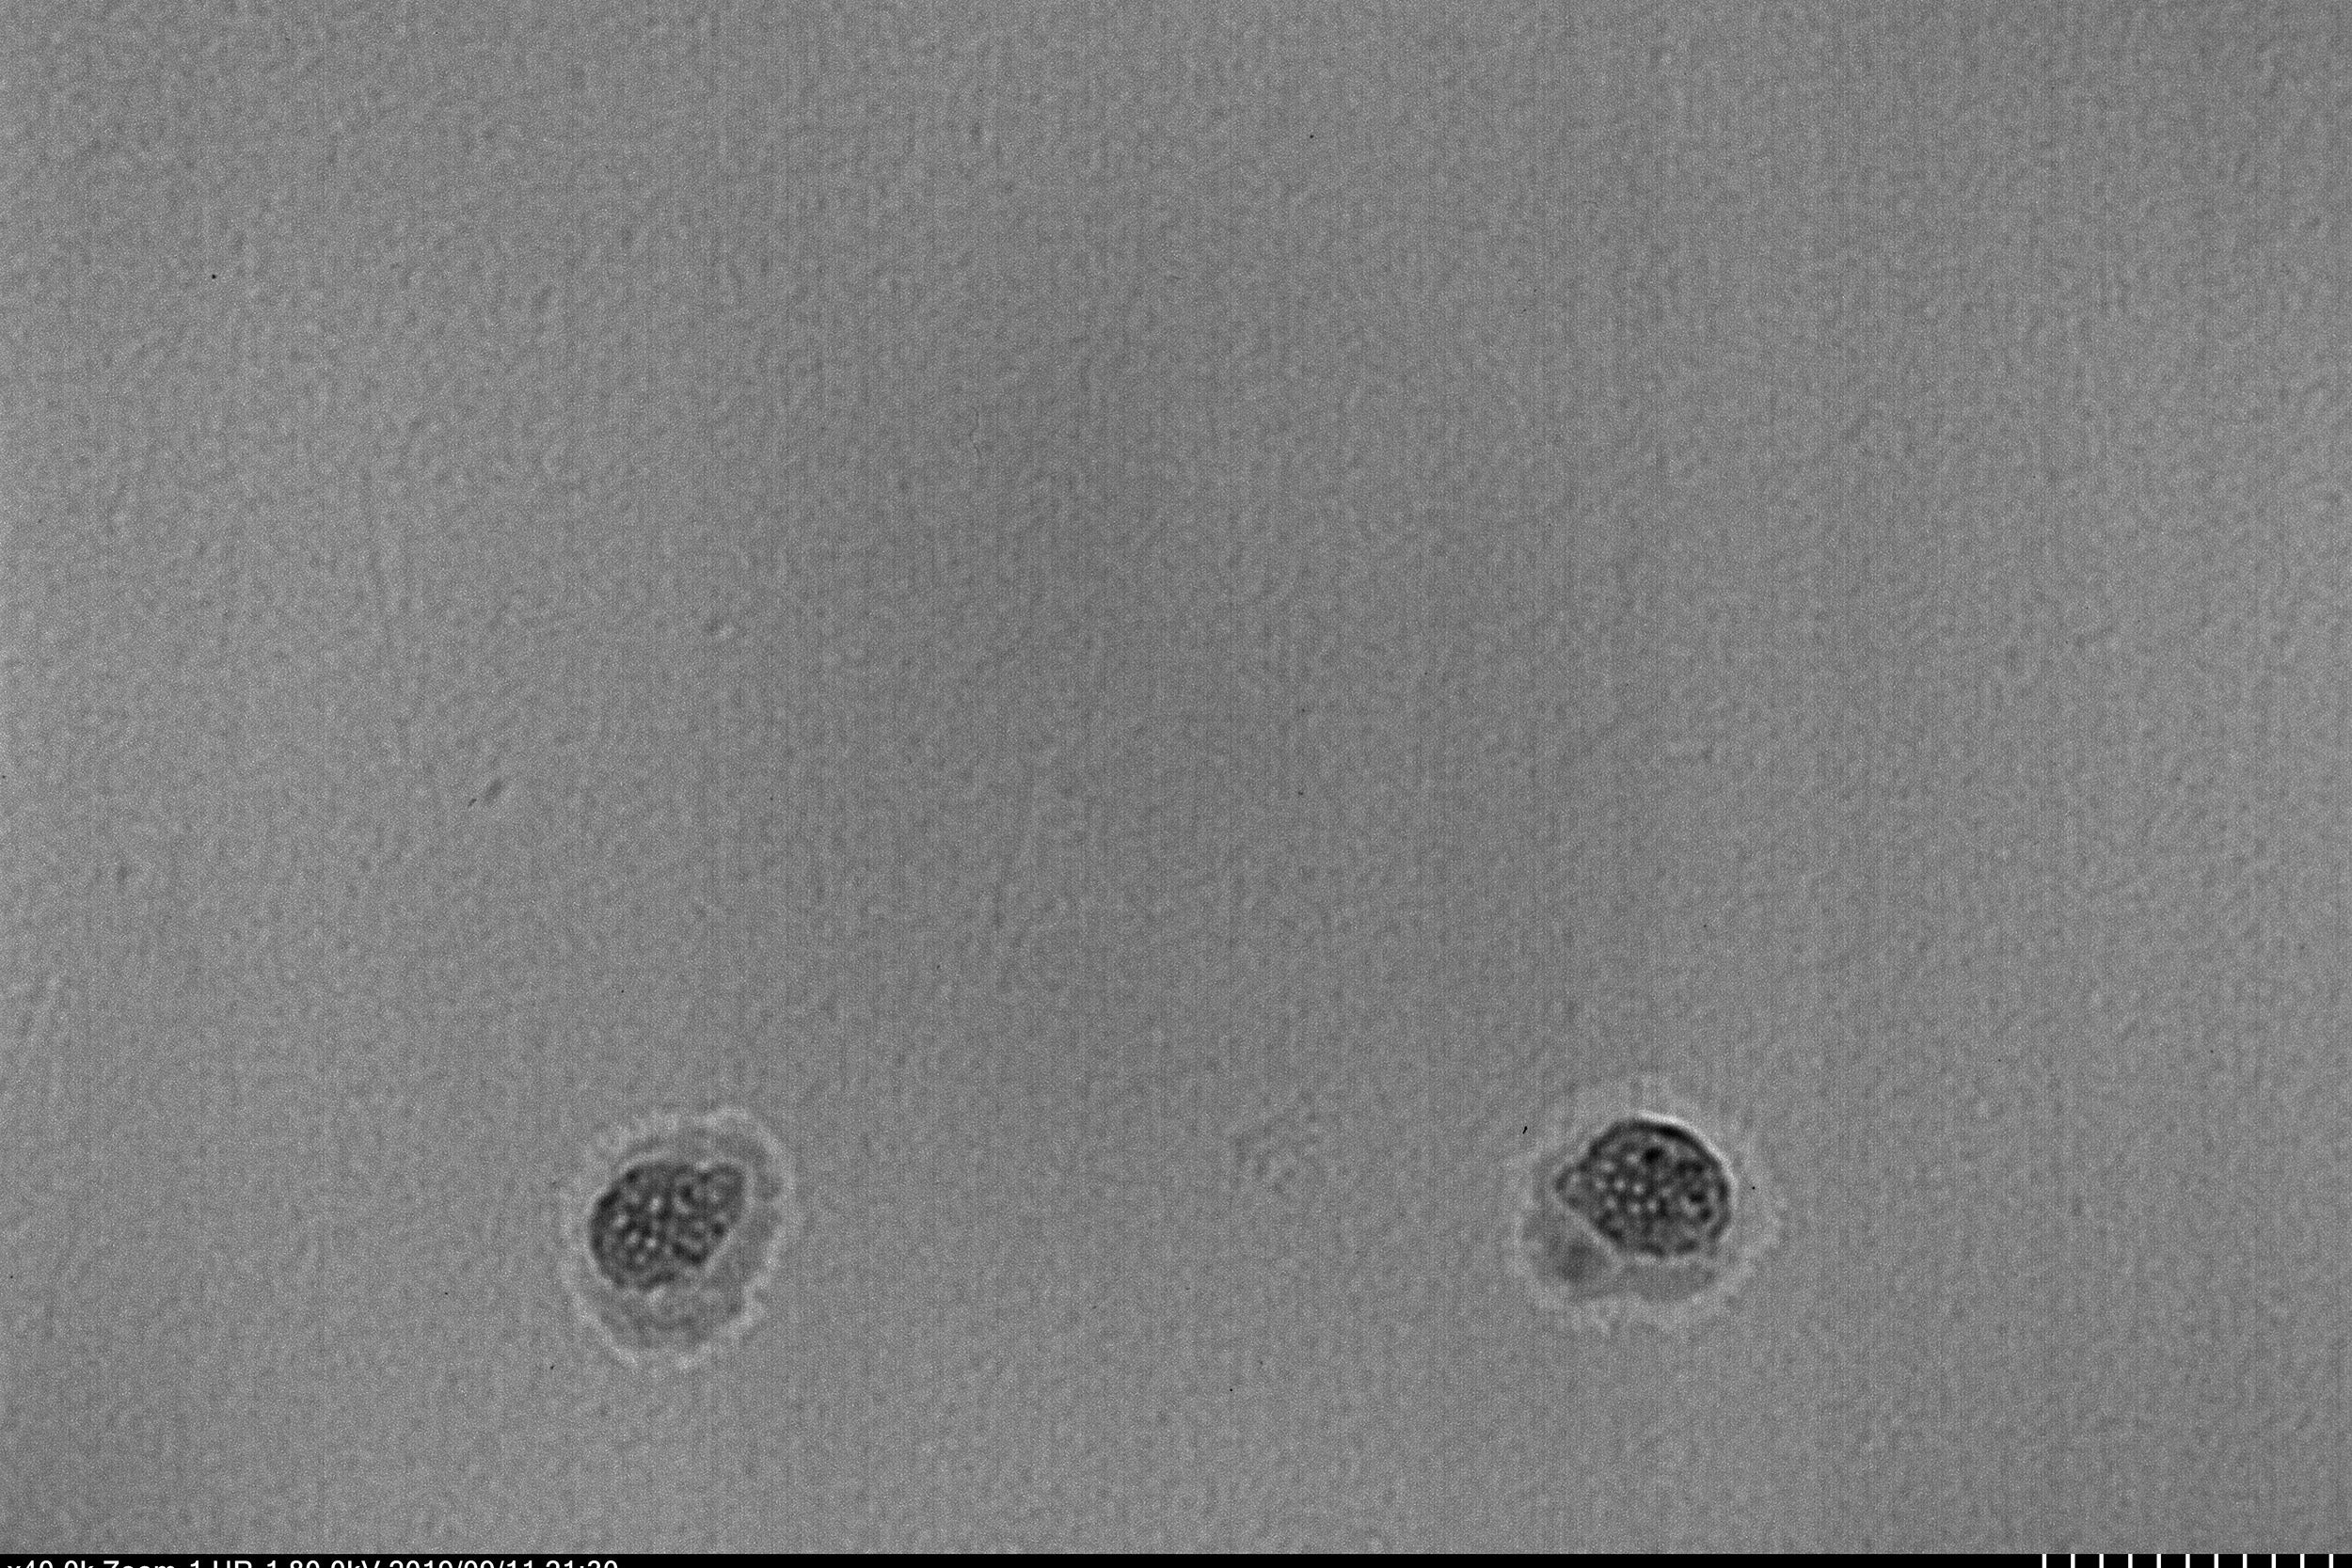 Ionic coating on a nanoparticle.